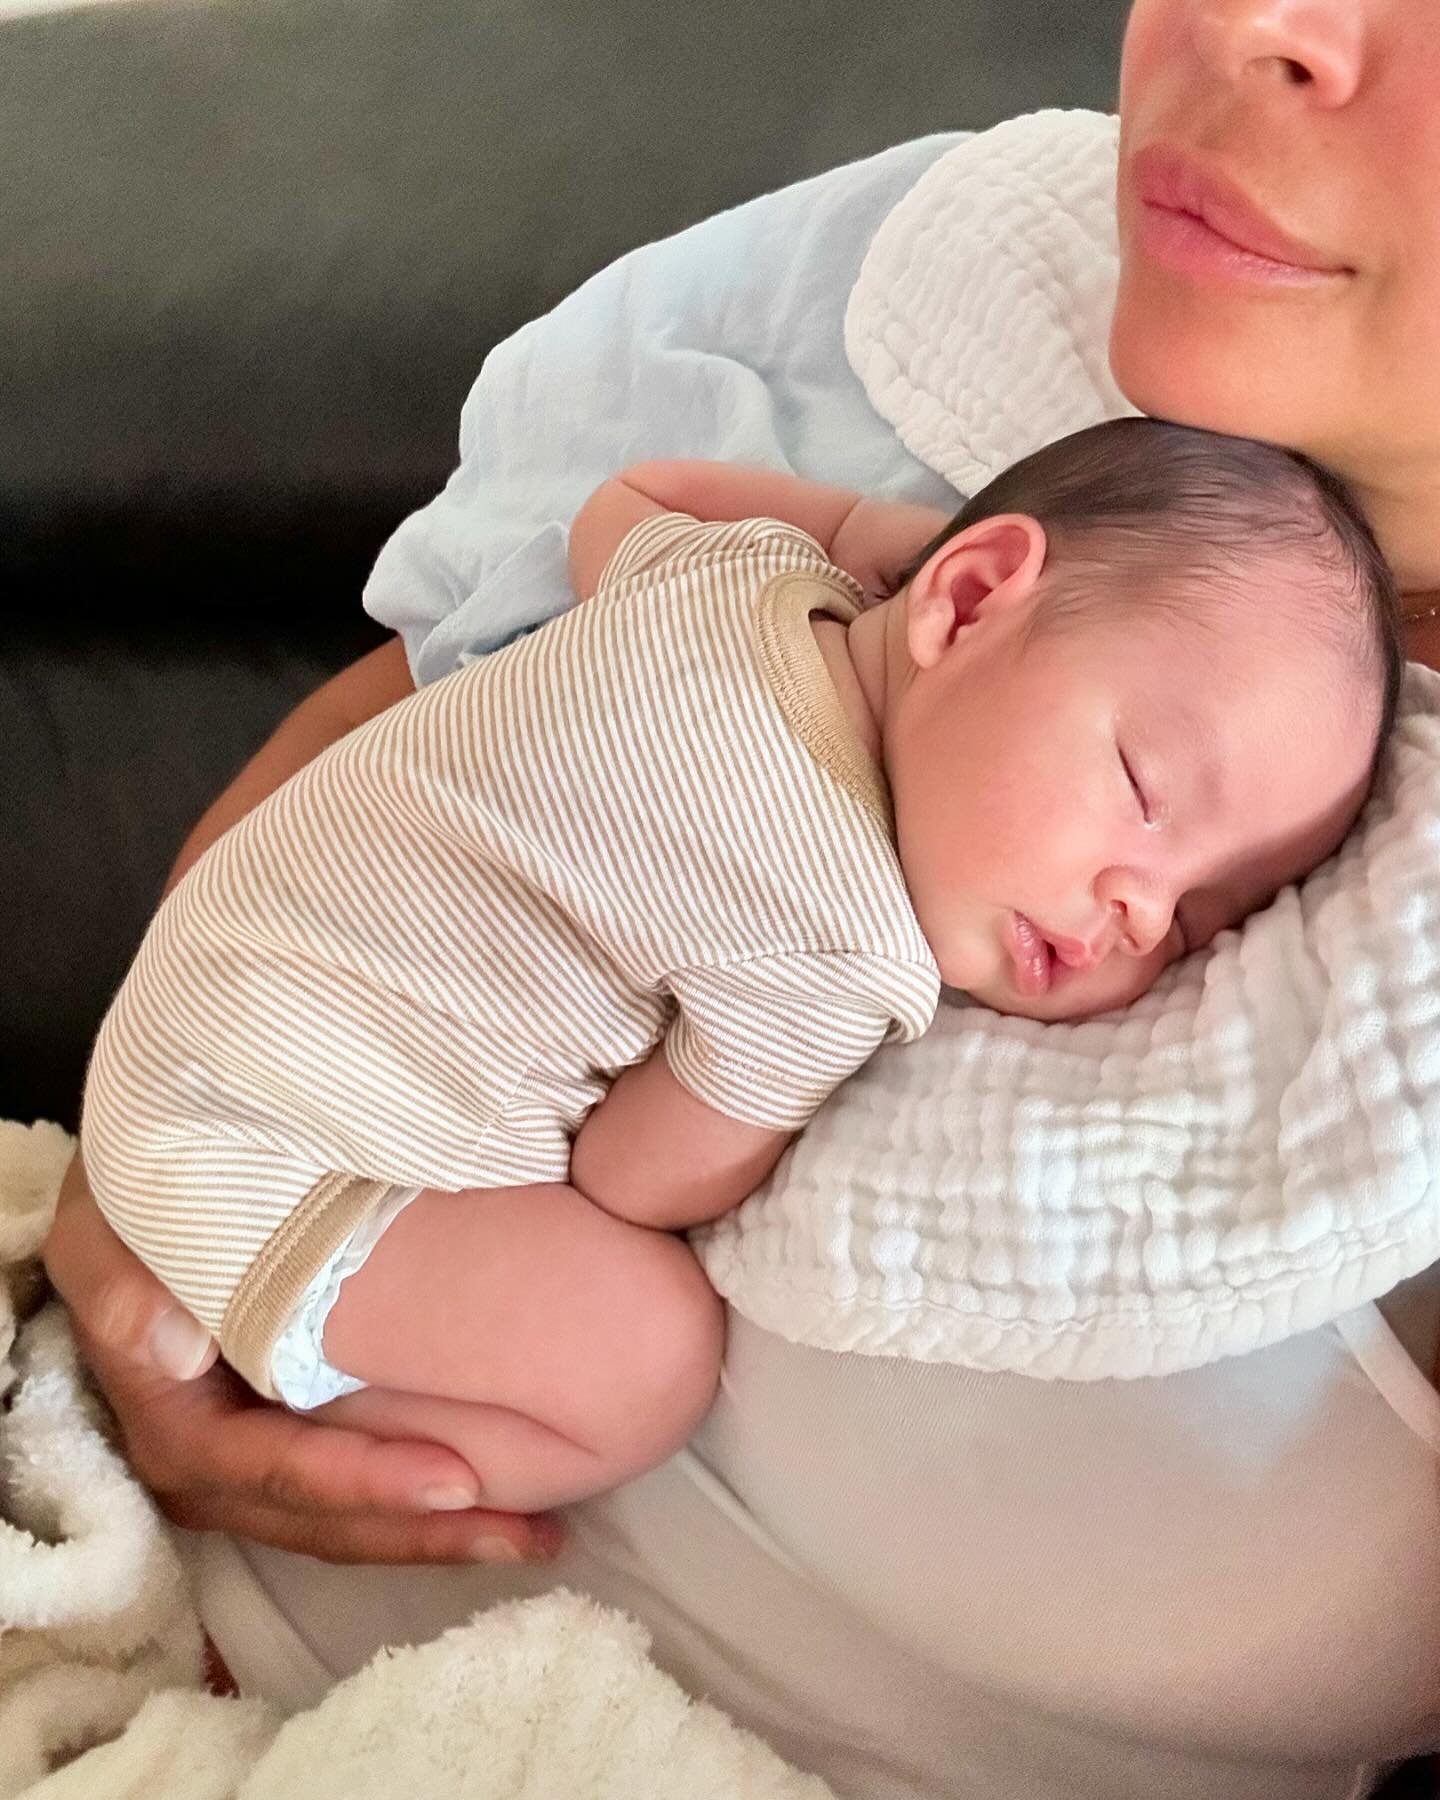 Ezra, you will forever be guided with love and support and I am so thankful and blessed to be your Nina.

Please meet my beautiful Godson, Ezra. Yesterday was magic. Thank you @jessicajane_ and @_justfrankie for this incredible last year together. I 